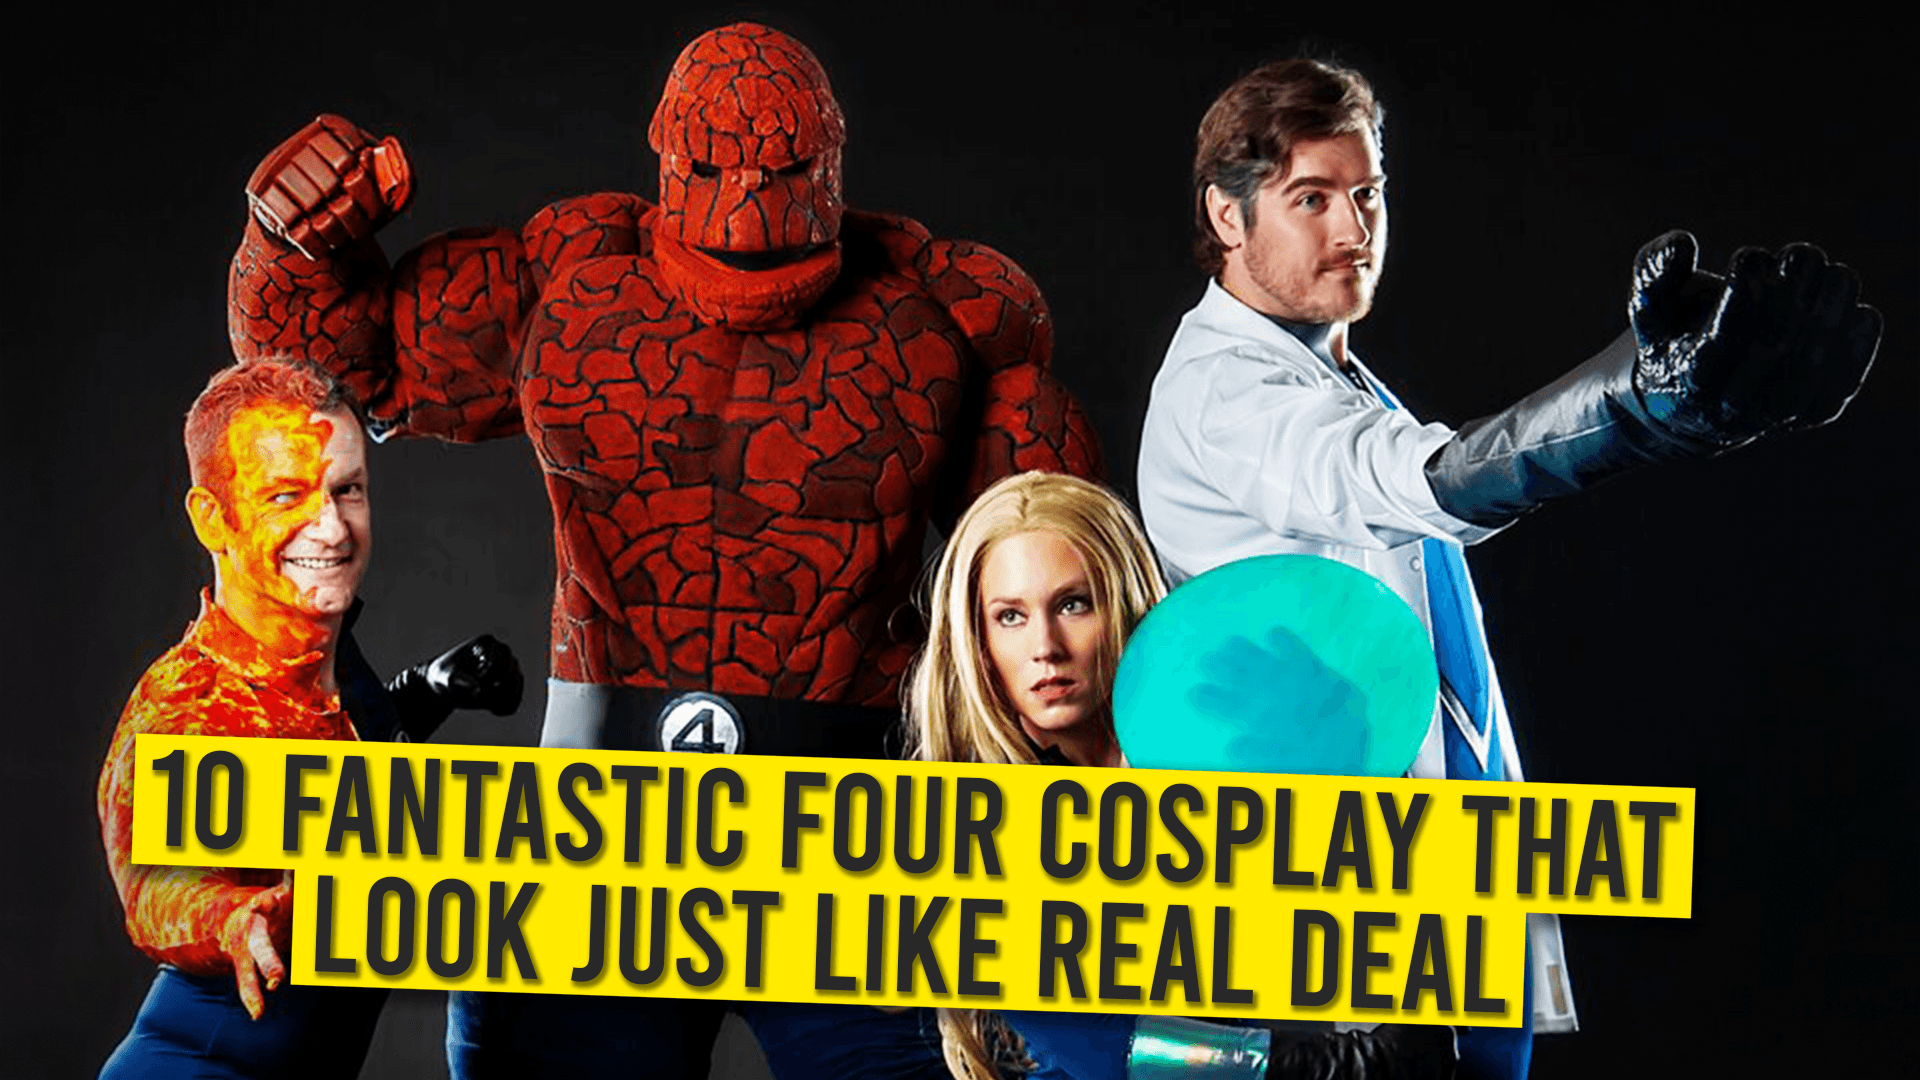 10 Fantastic Four Cosplay That Look Just Like Real Deal